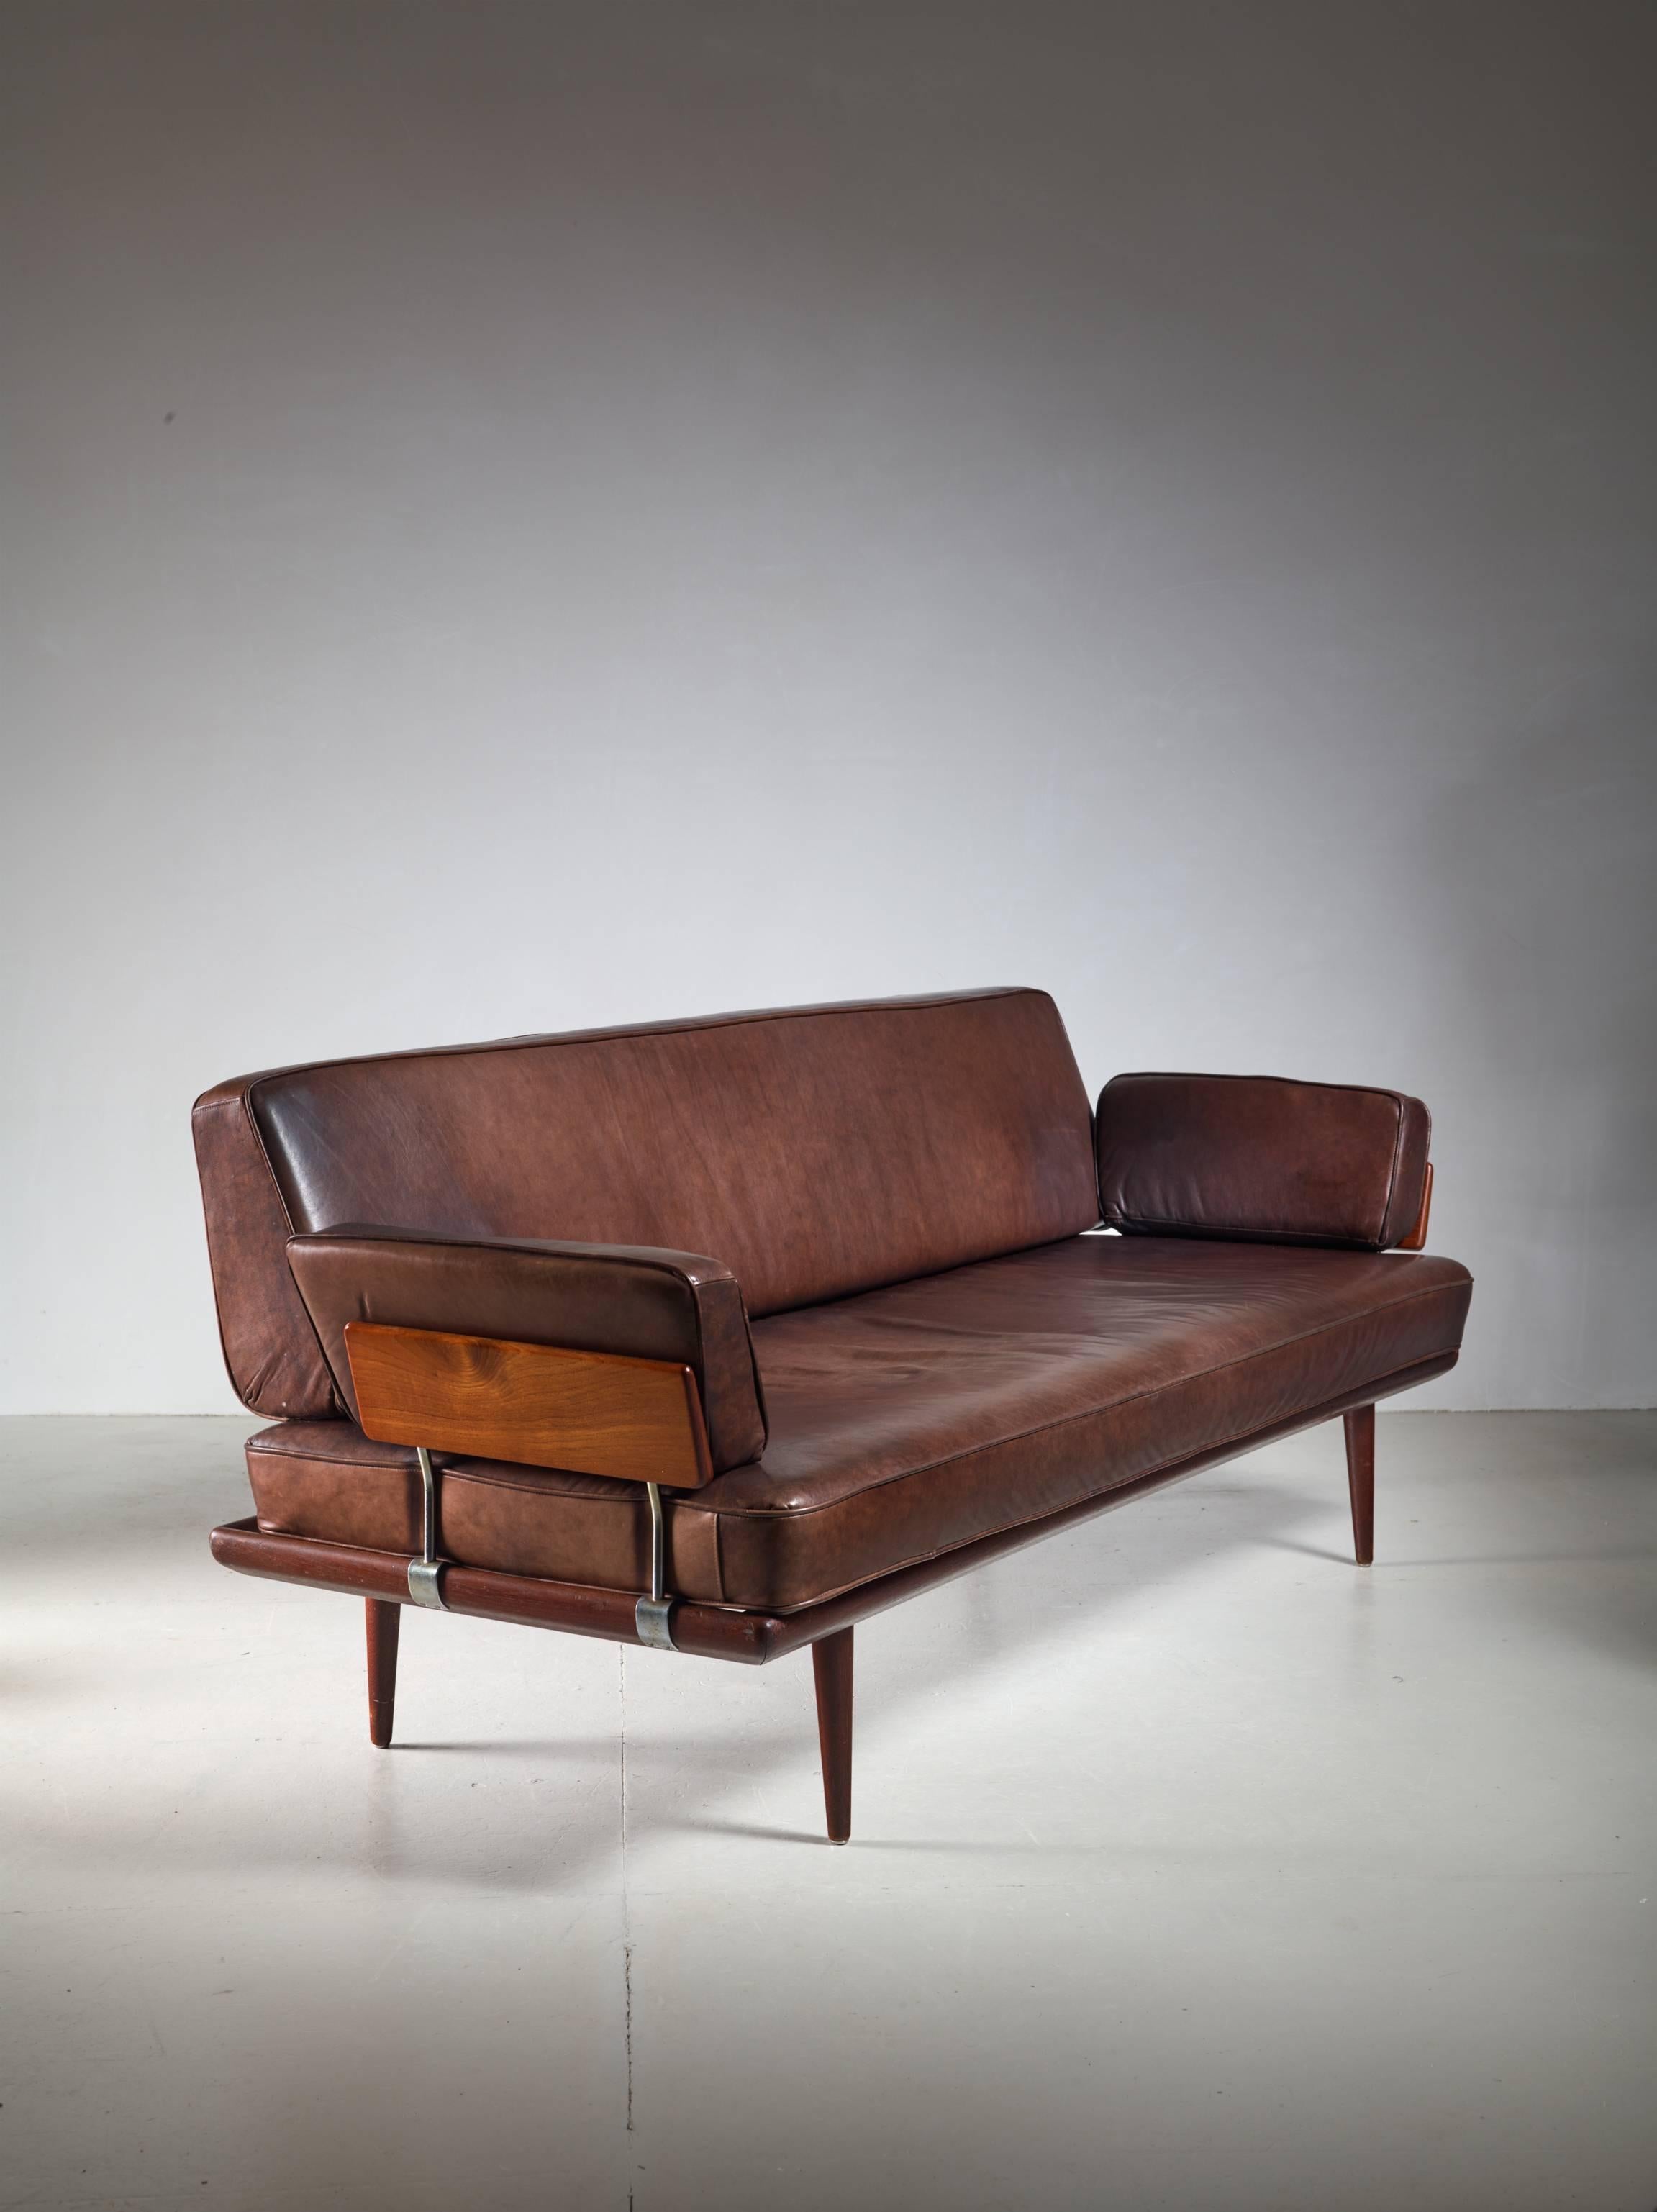 A model 'Minerva' sofa by Peter Hvidt & Orla Mølgaard Nielsen for France & Søn. Beautiful tapering legs and removable armrests and backrest.
The frame is in an excellent condition with minor signs of usage and the chocolate brown leather is